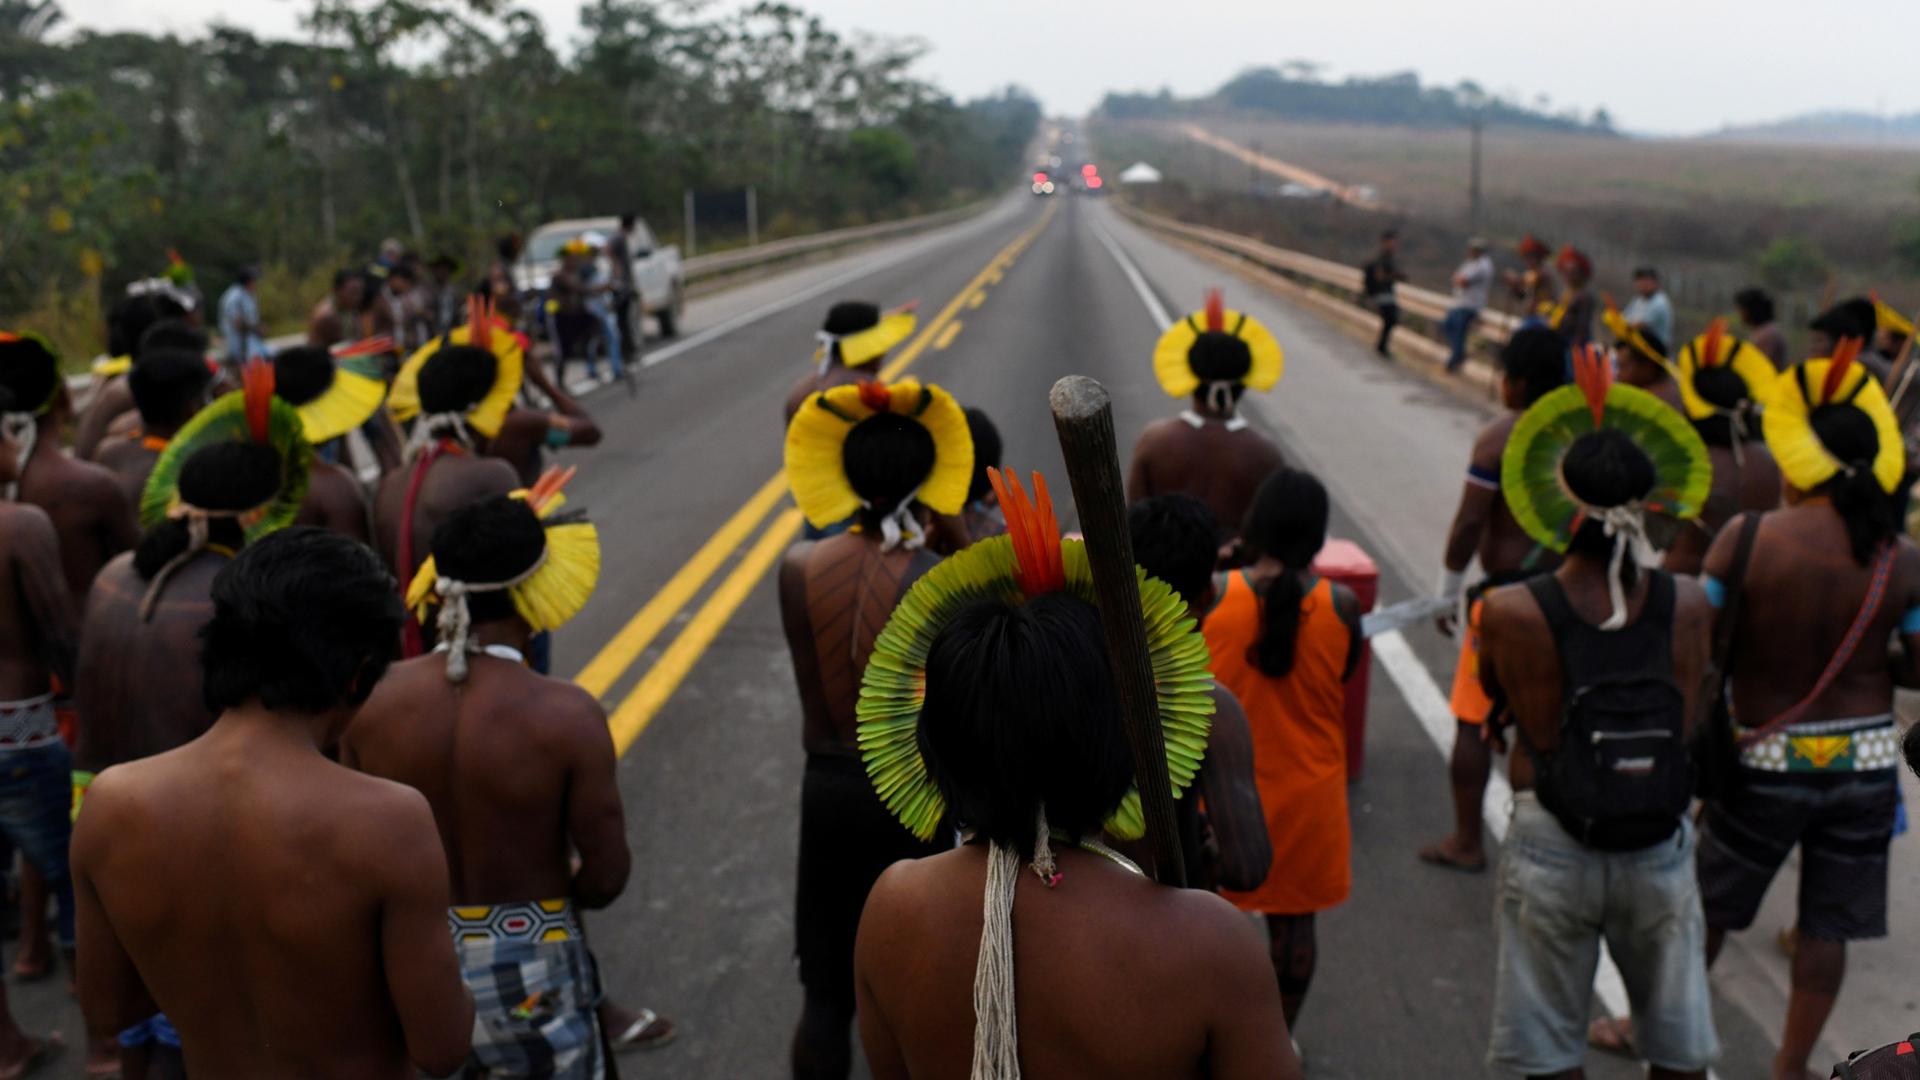 Kayapó indigenous people block Brazil's BR-163 national highway, as they protest against the government measures in the Indigenous lands to avoid the spread of the coronavirus, in Novo Progresso, Pará state, Brazil, August 18, 2020.